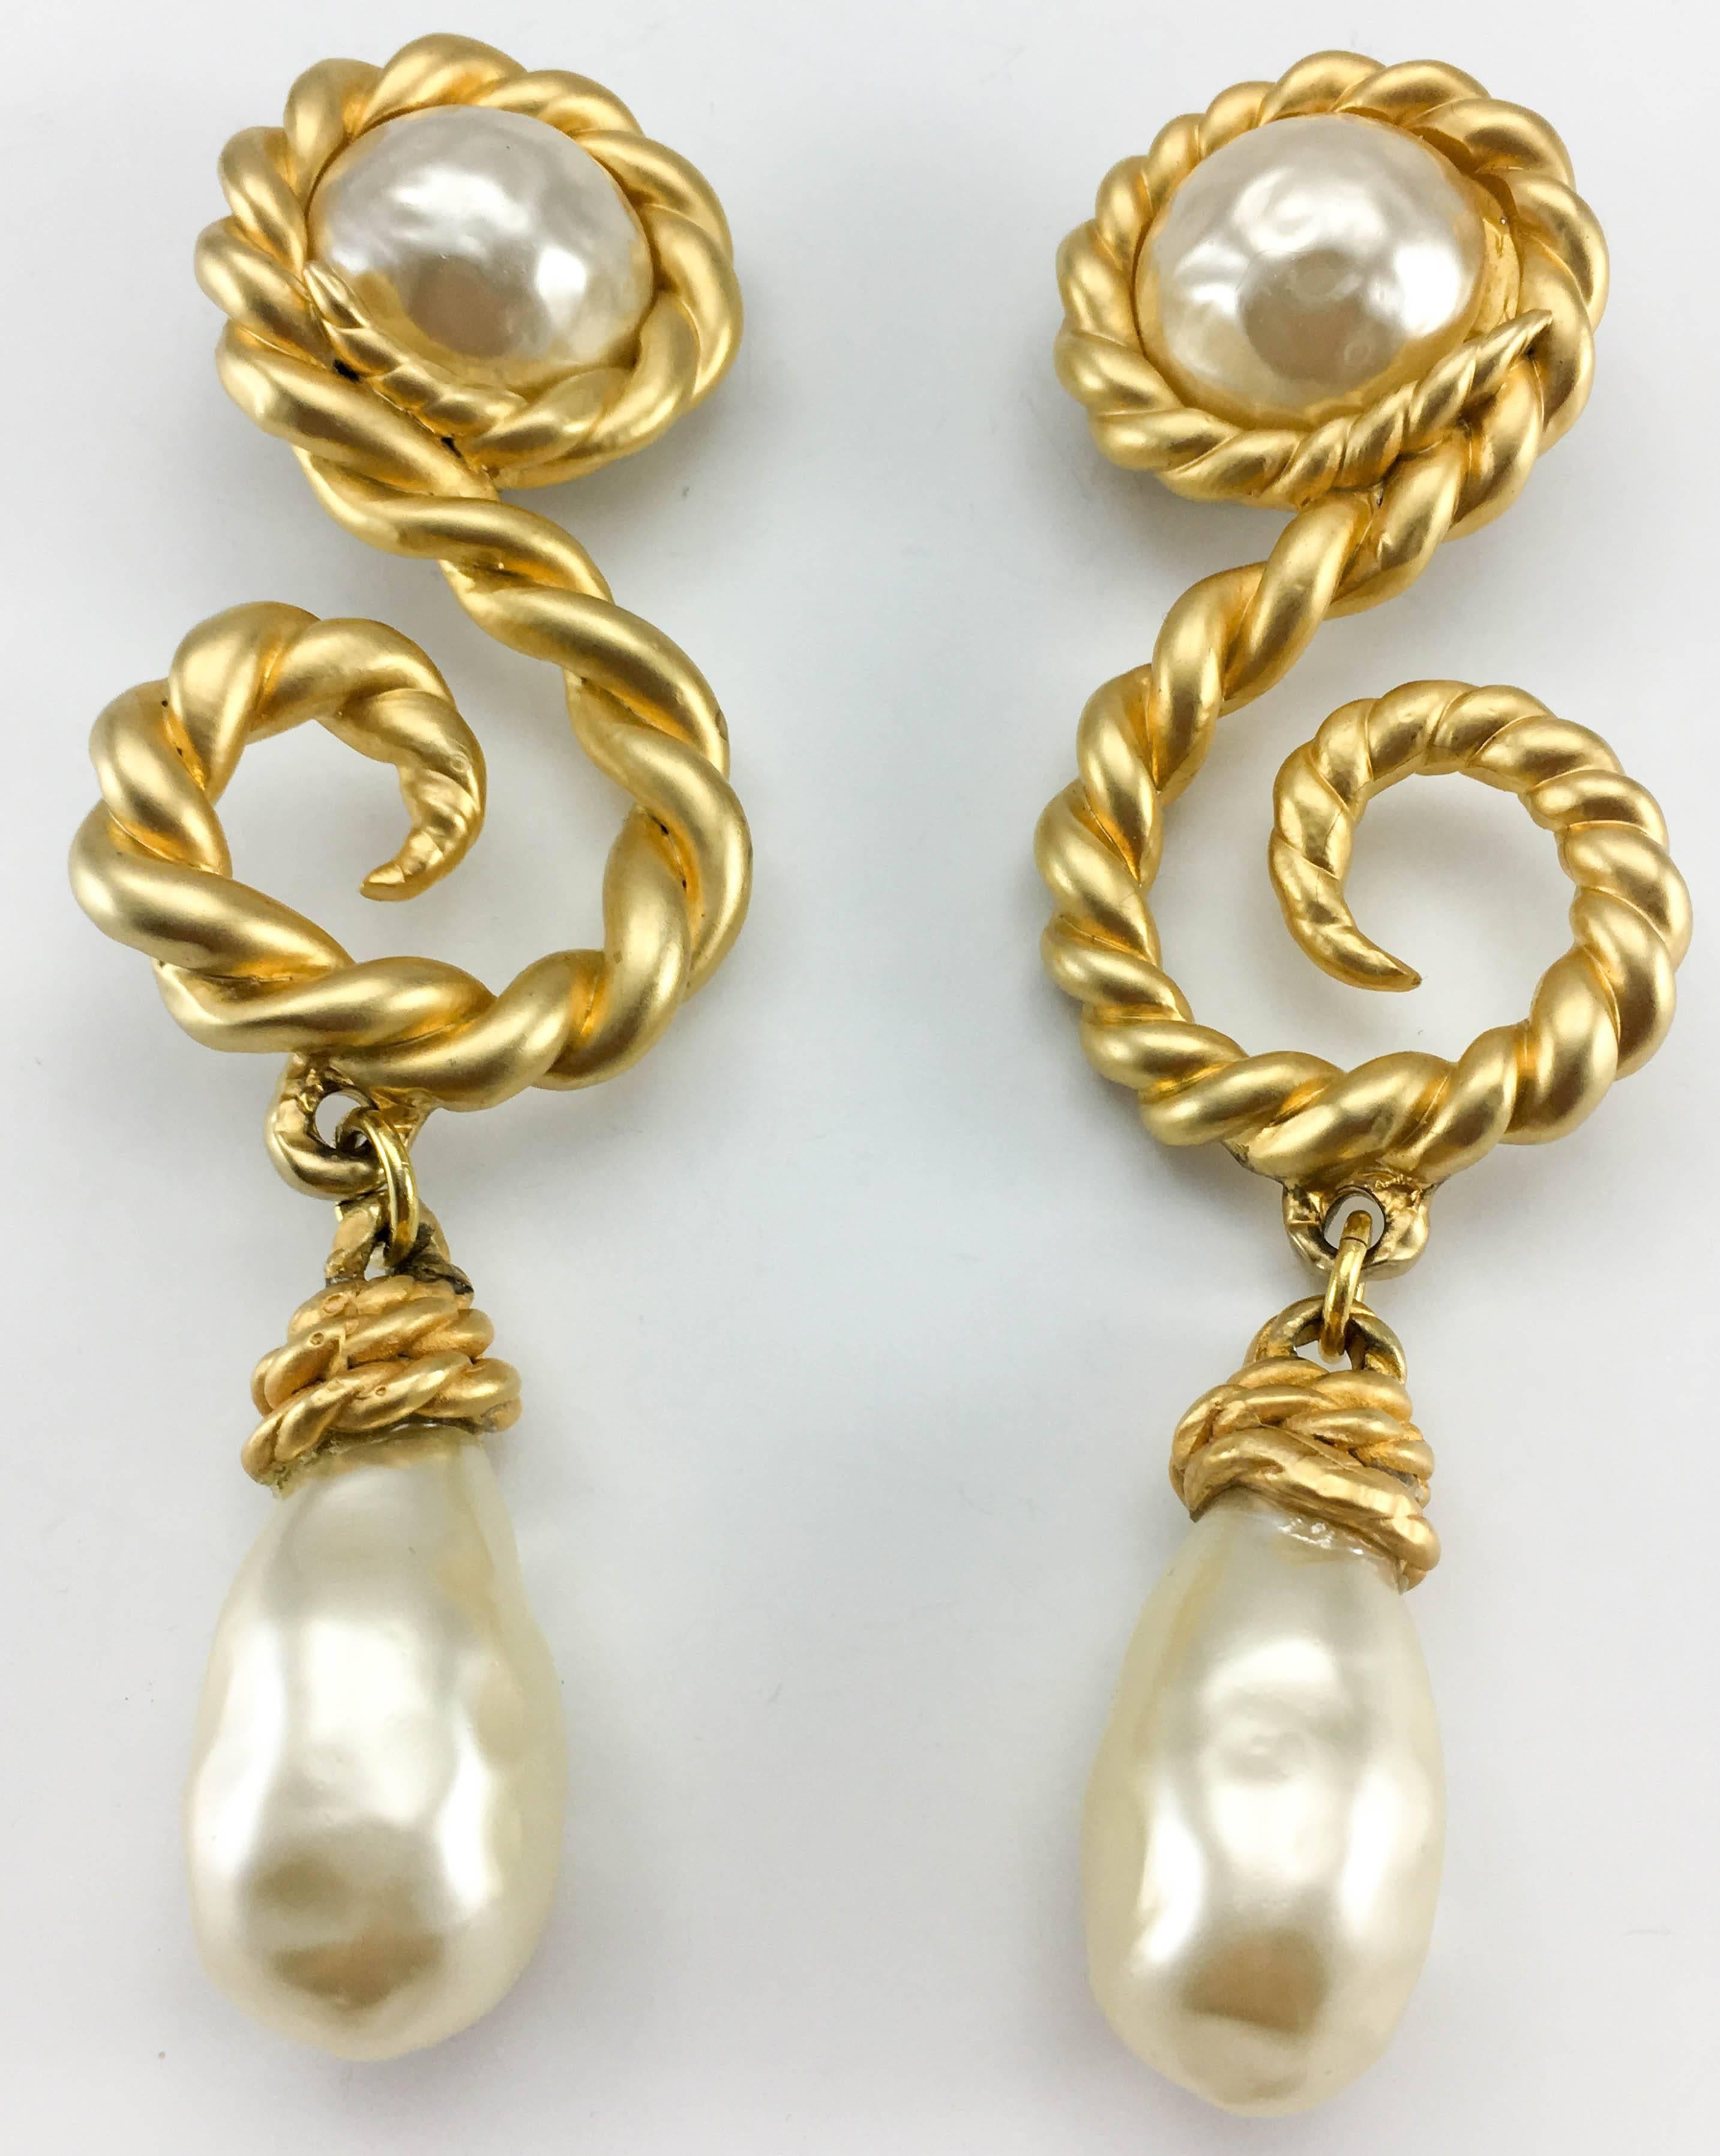 Chanel 1990 Runway Look Massive Arabesque and Baroque Pearl Earrings 3